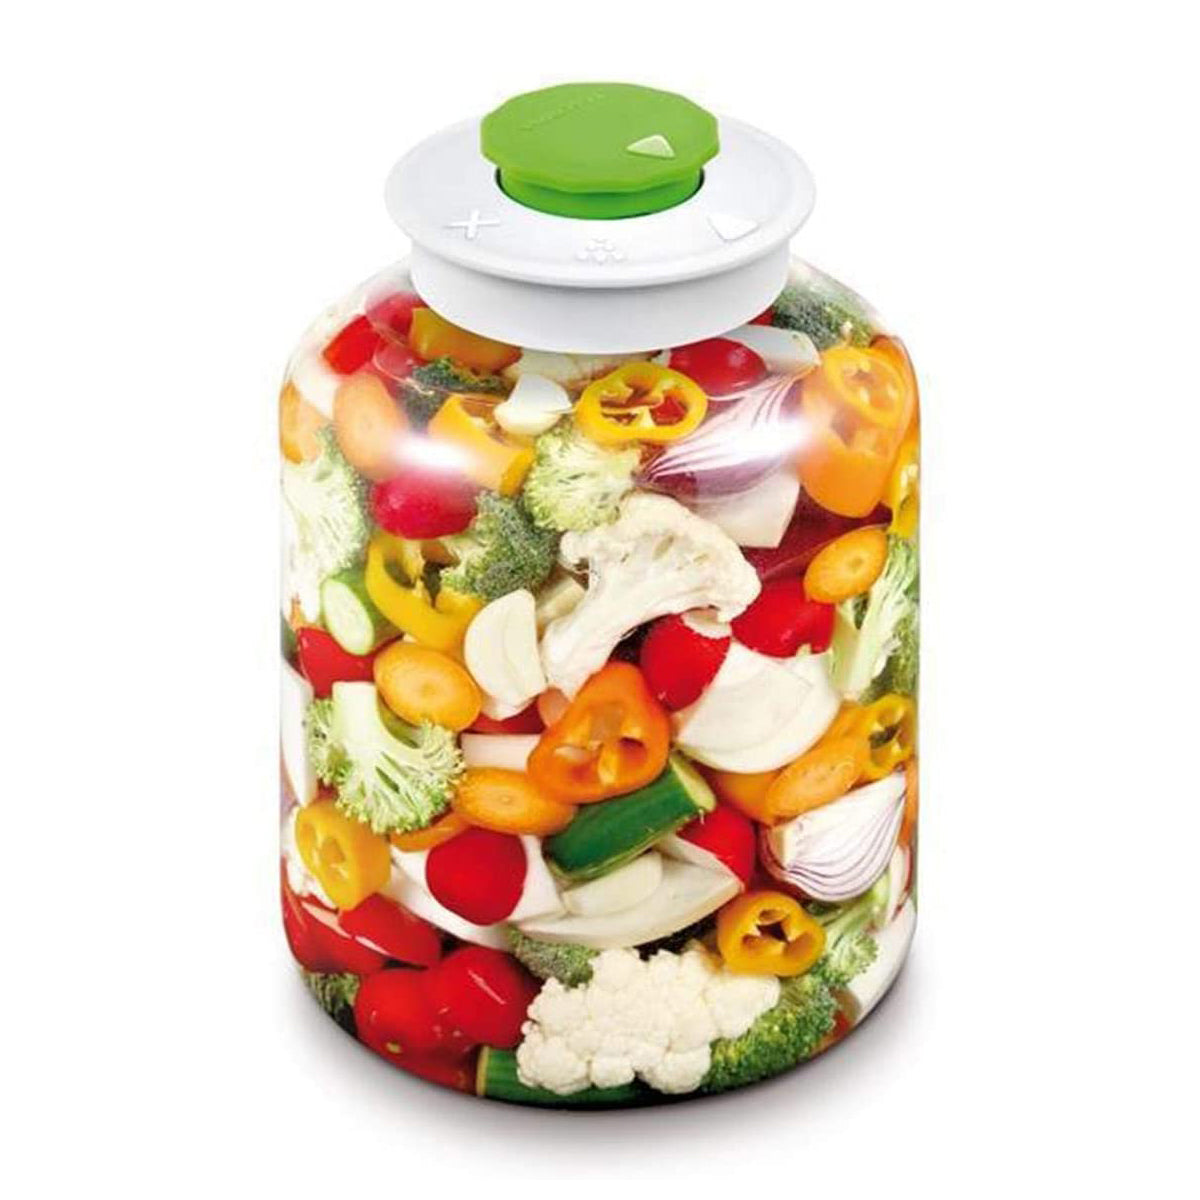 Starter cultures for making raw pickled vegetables and fruits